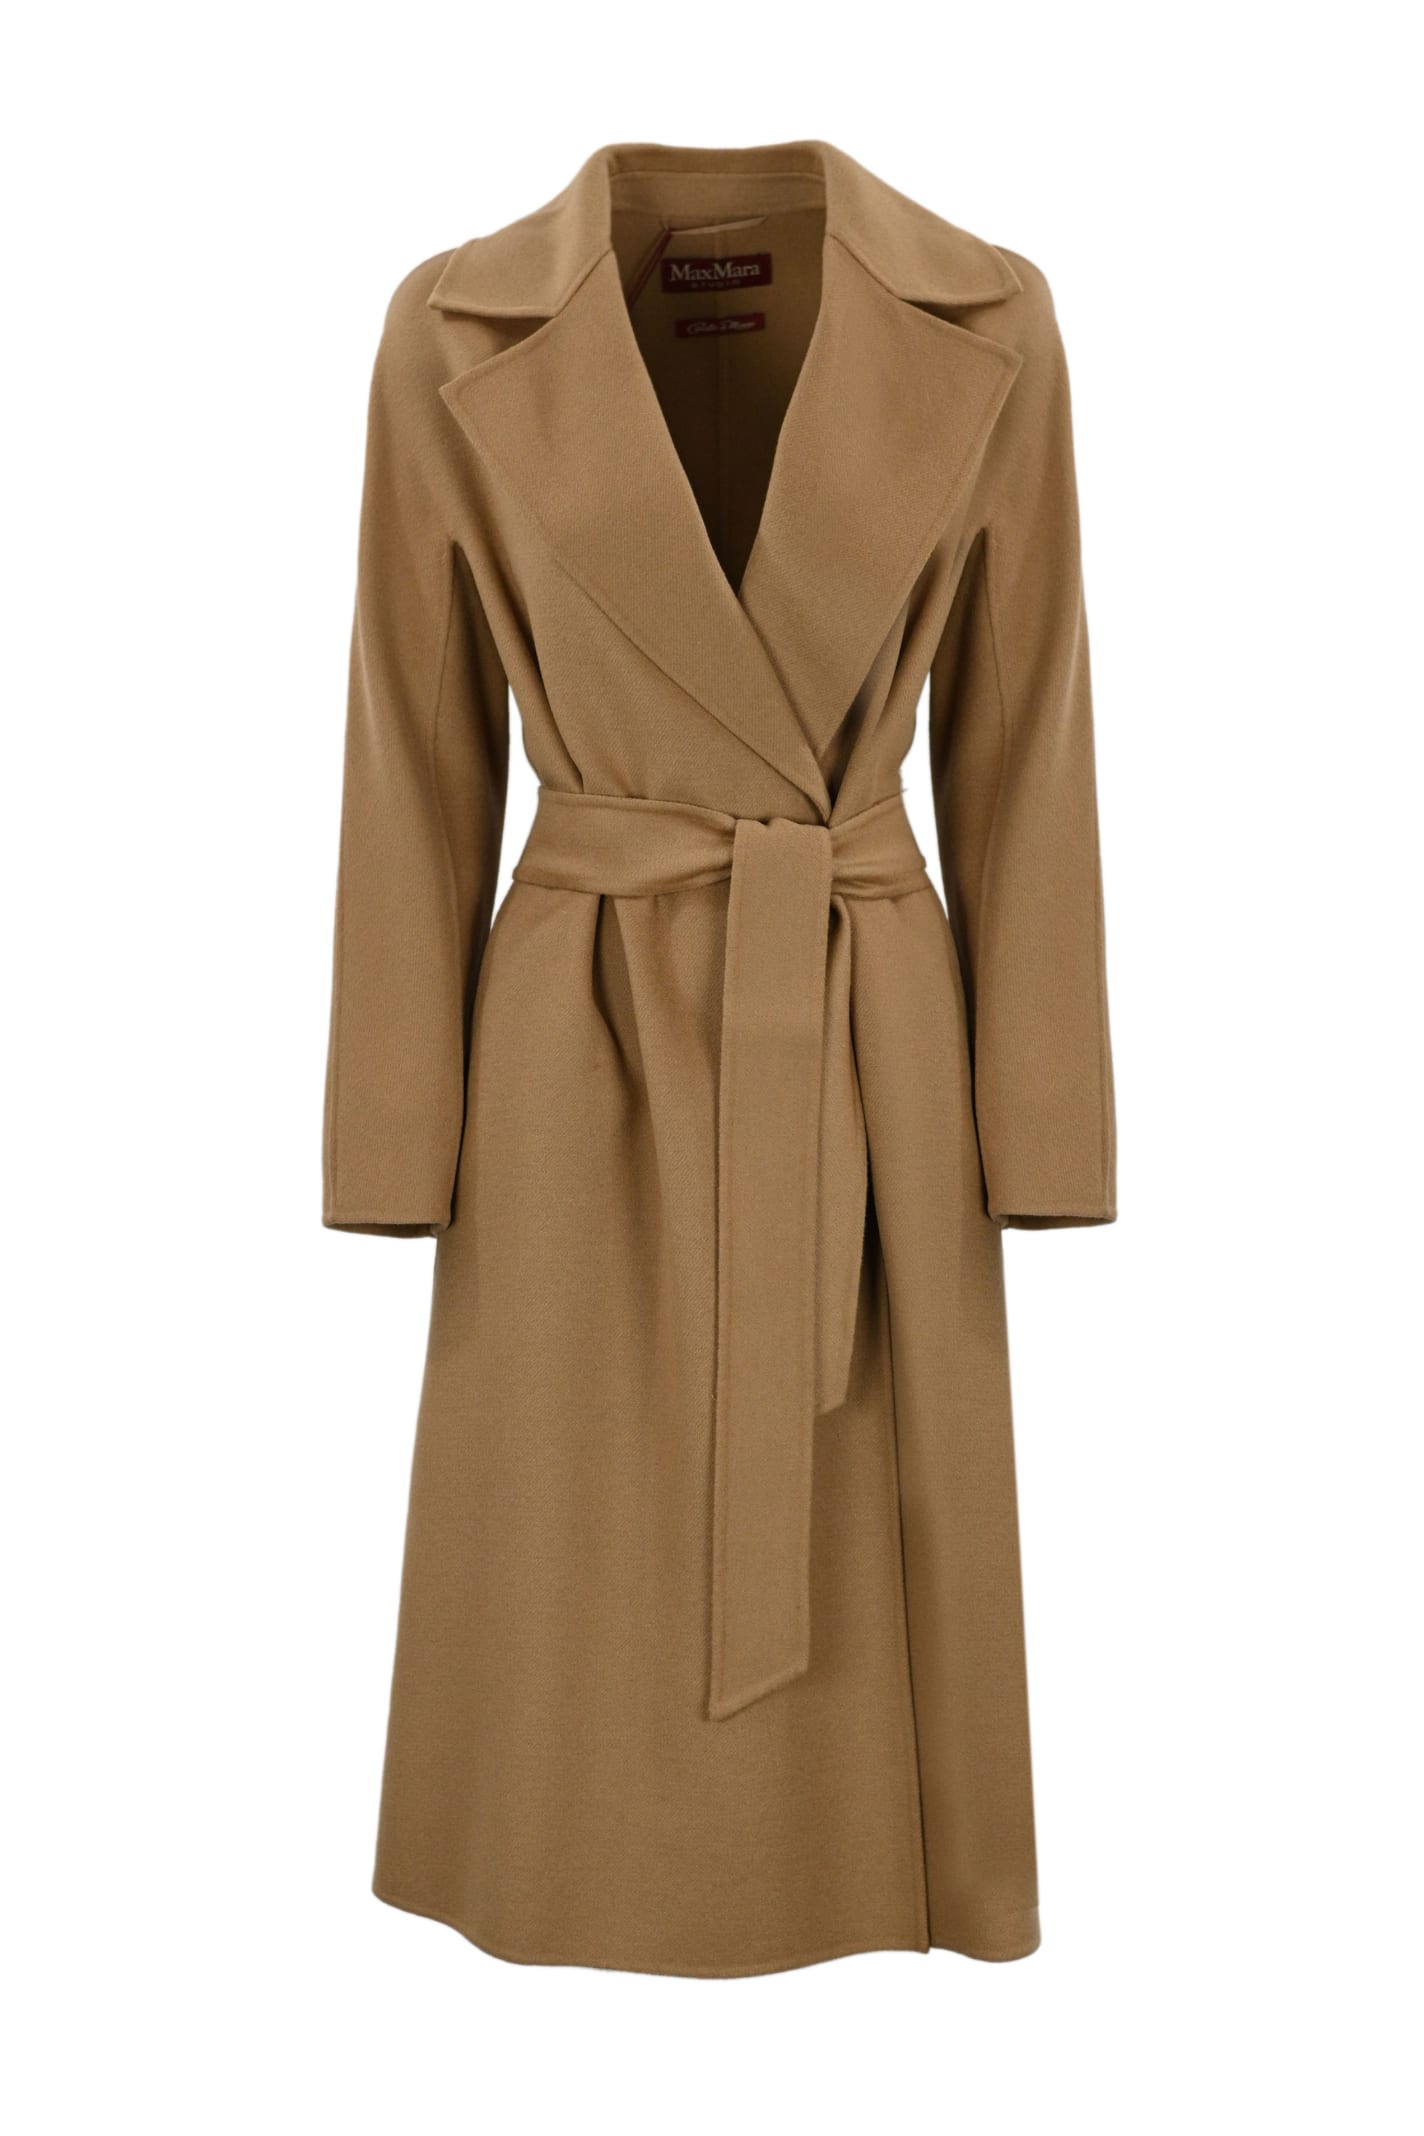 MAX MARA CLES WOOL AND CASHMERE COAT